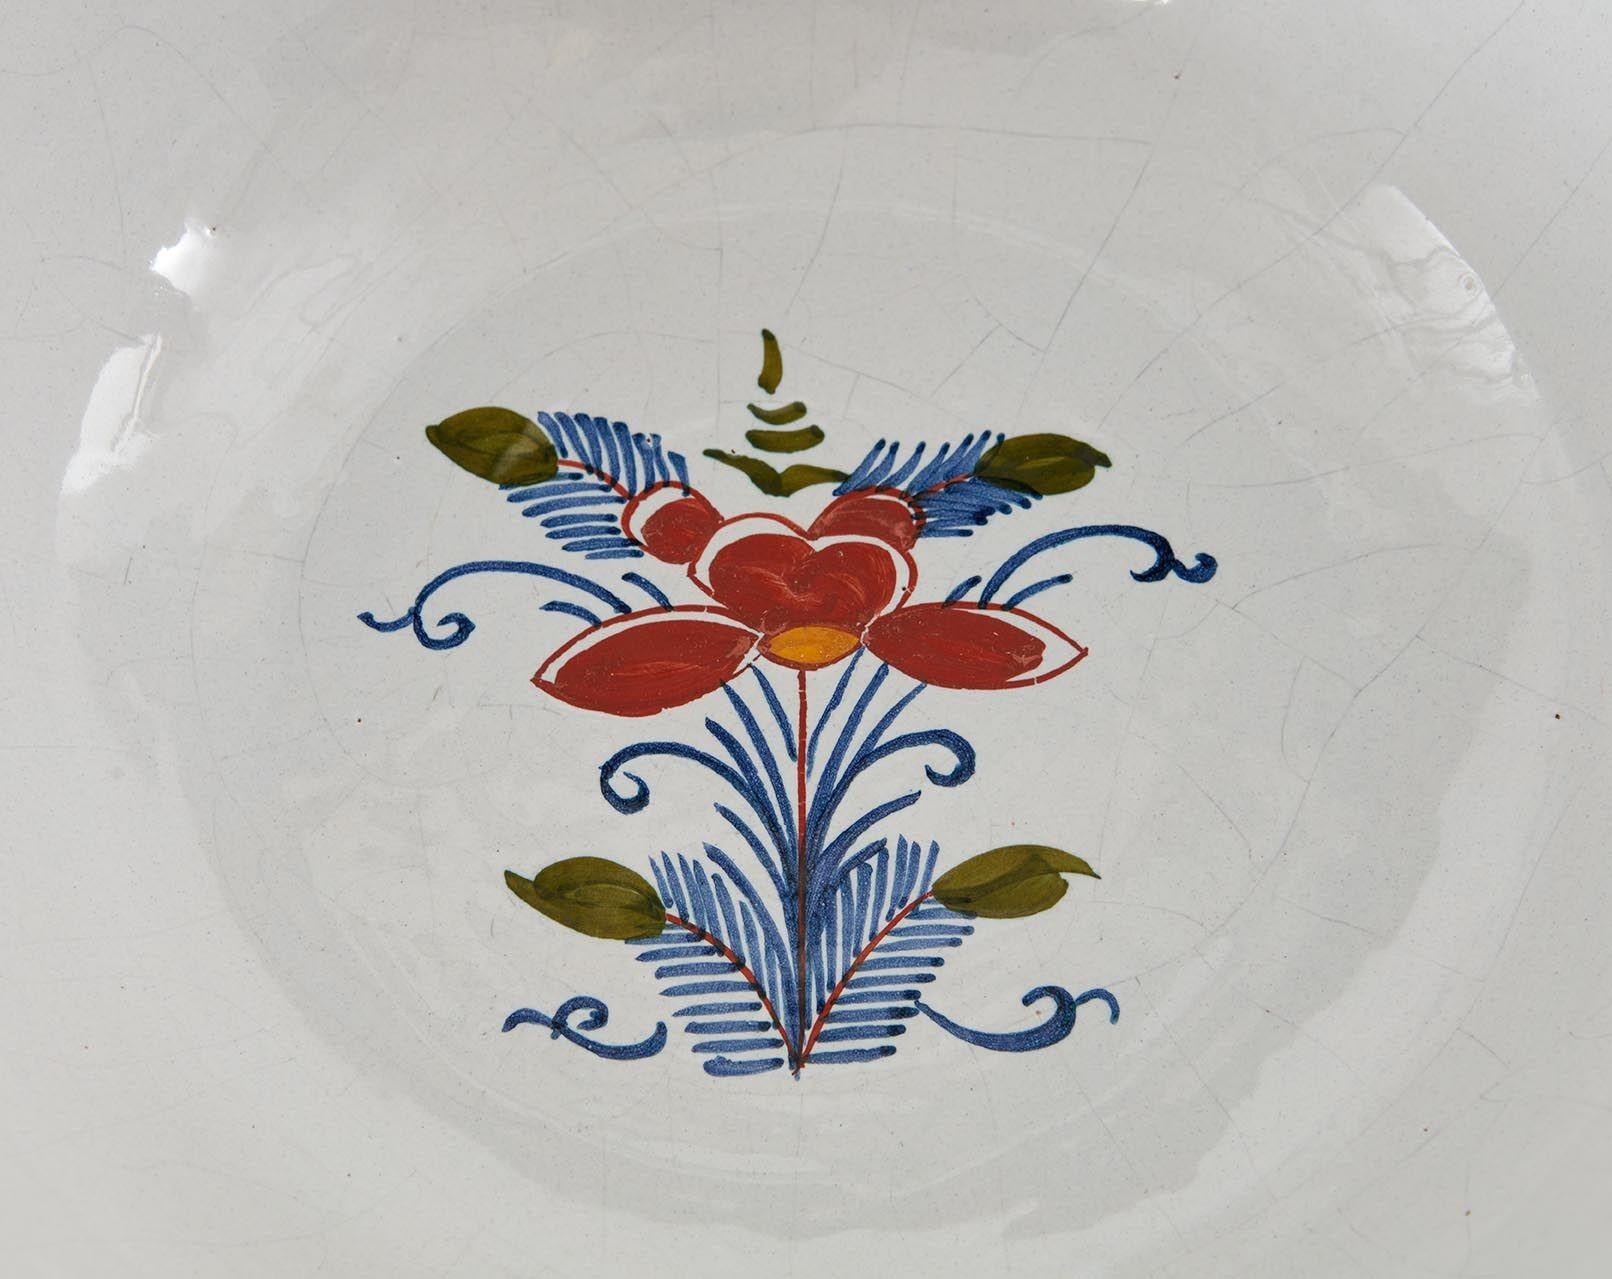 A deep delft punch bowl with polychrome decoration in reds, yellows and blues on a white ground with extensive exterior coverage depicting flowers in overlapping rounded tiles with a hatched grid above, and a single flower with leaves to the center